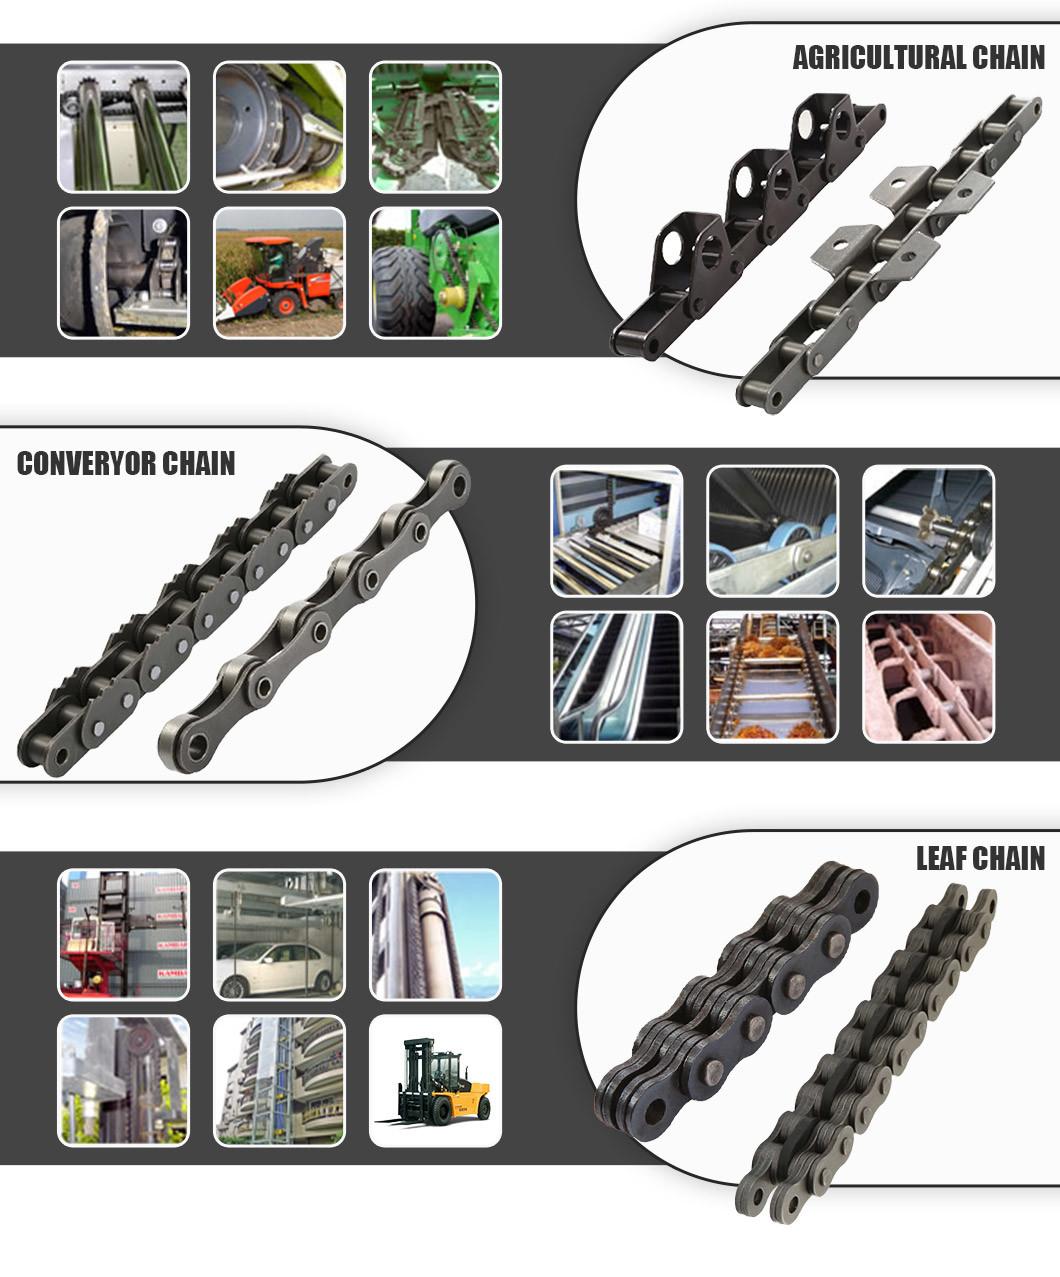 Best Quality Advanced Treatment Craft Bright Surface Stainless Steel Chain Sprocket